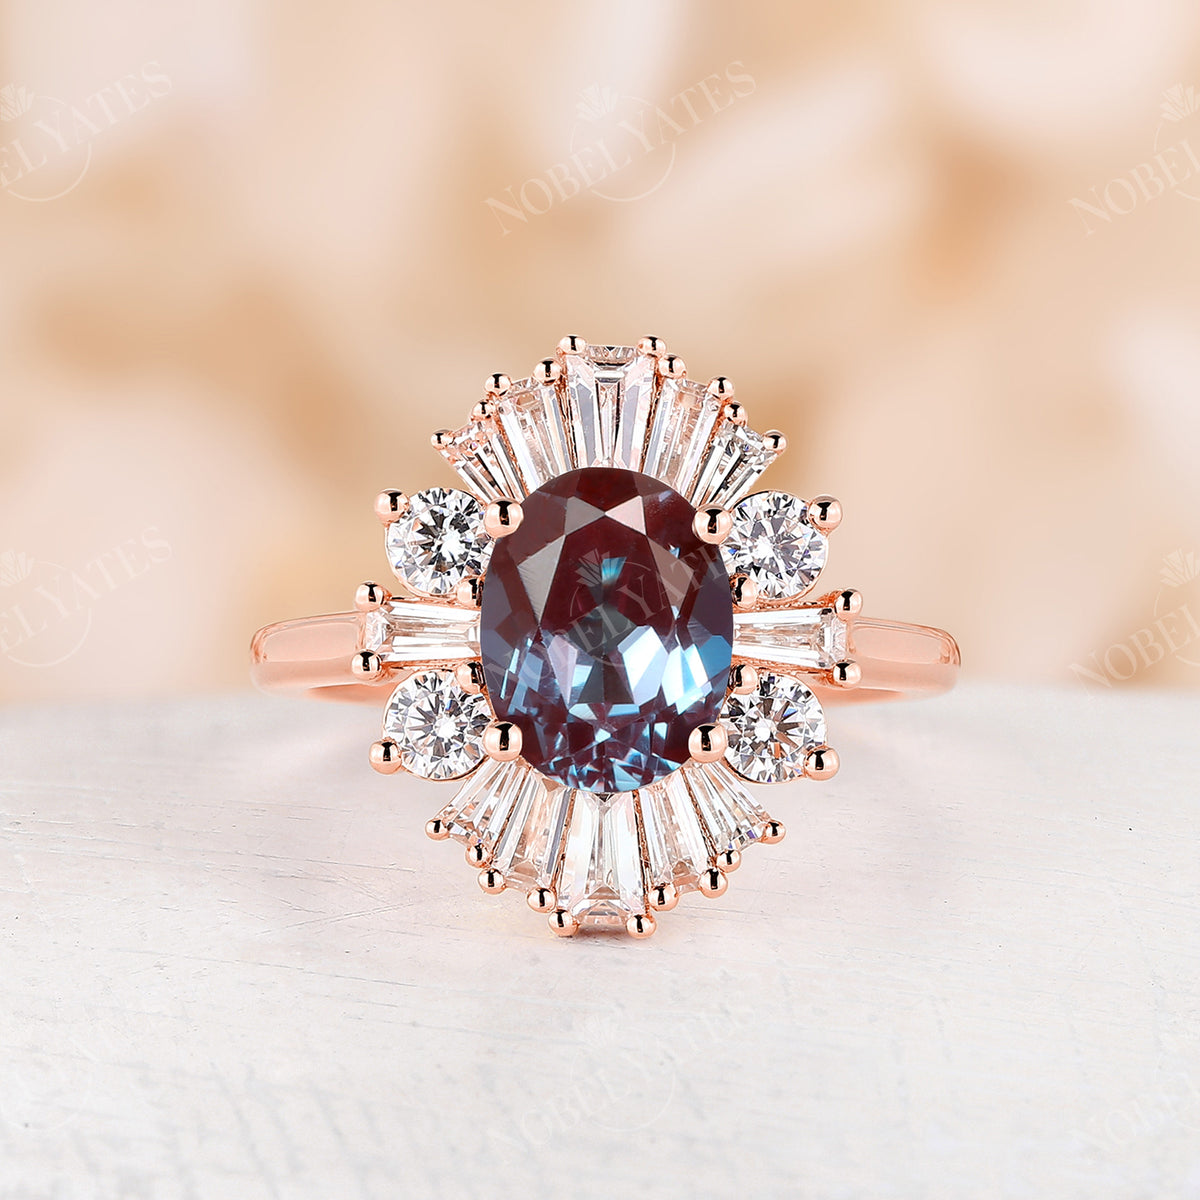 Oval Lab Alexandrite Art Deco Cluster Engagement Ring Rose Gold